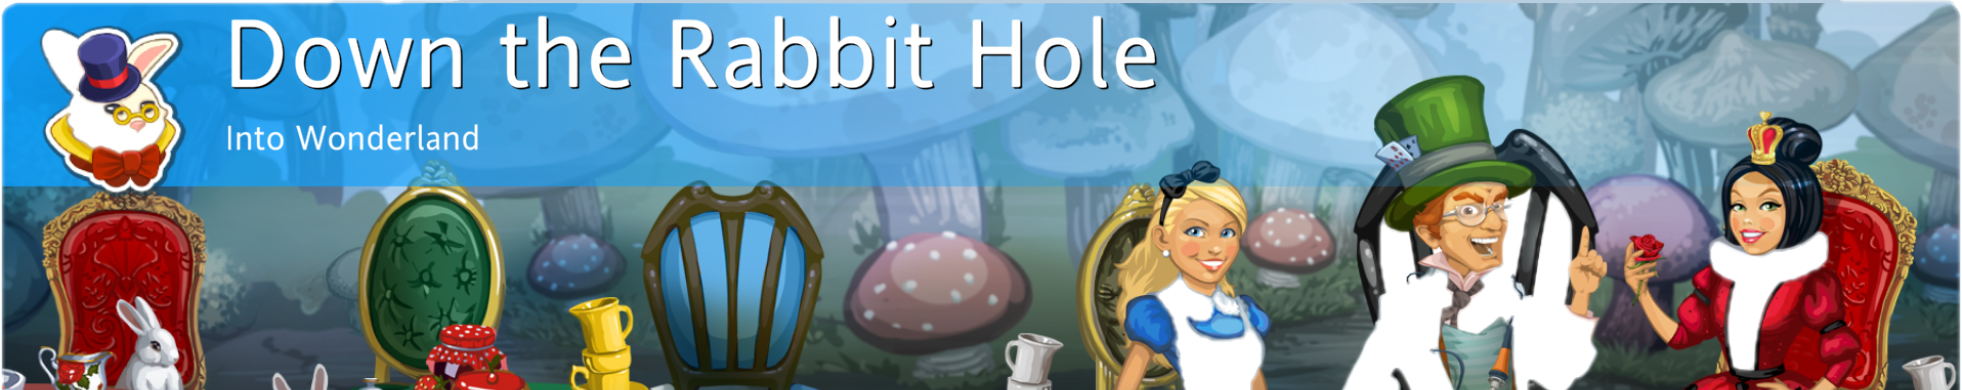 down the rabbit hole banner.png